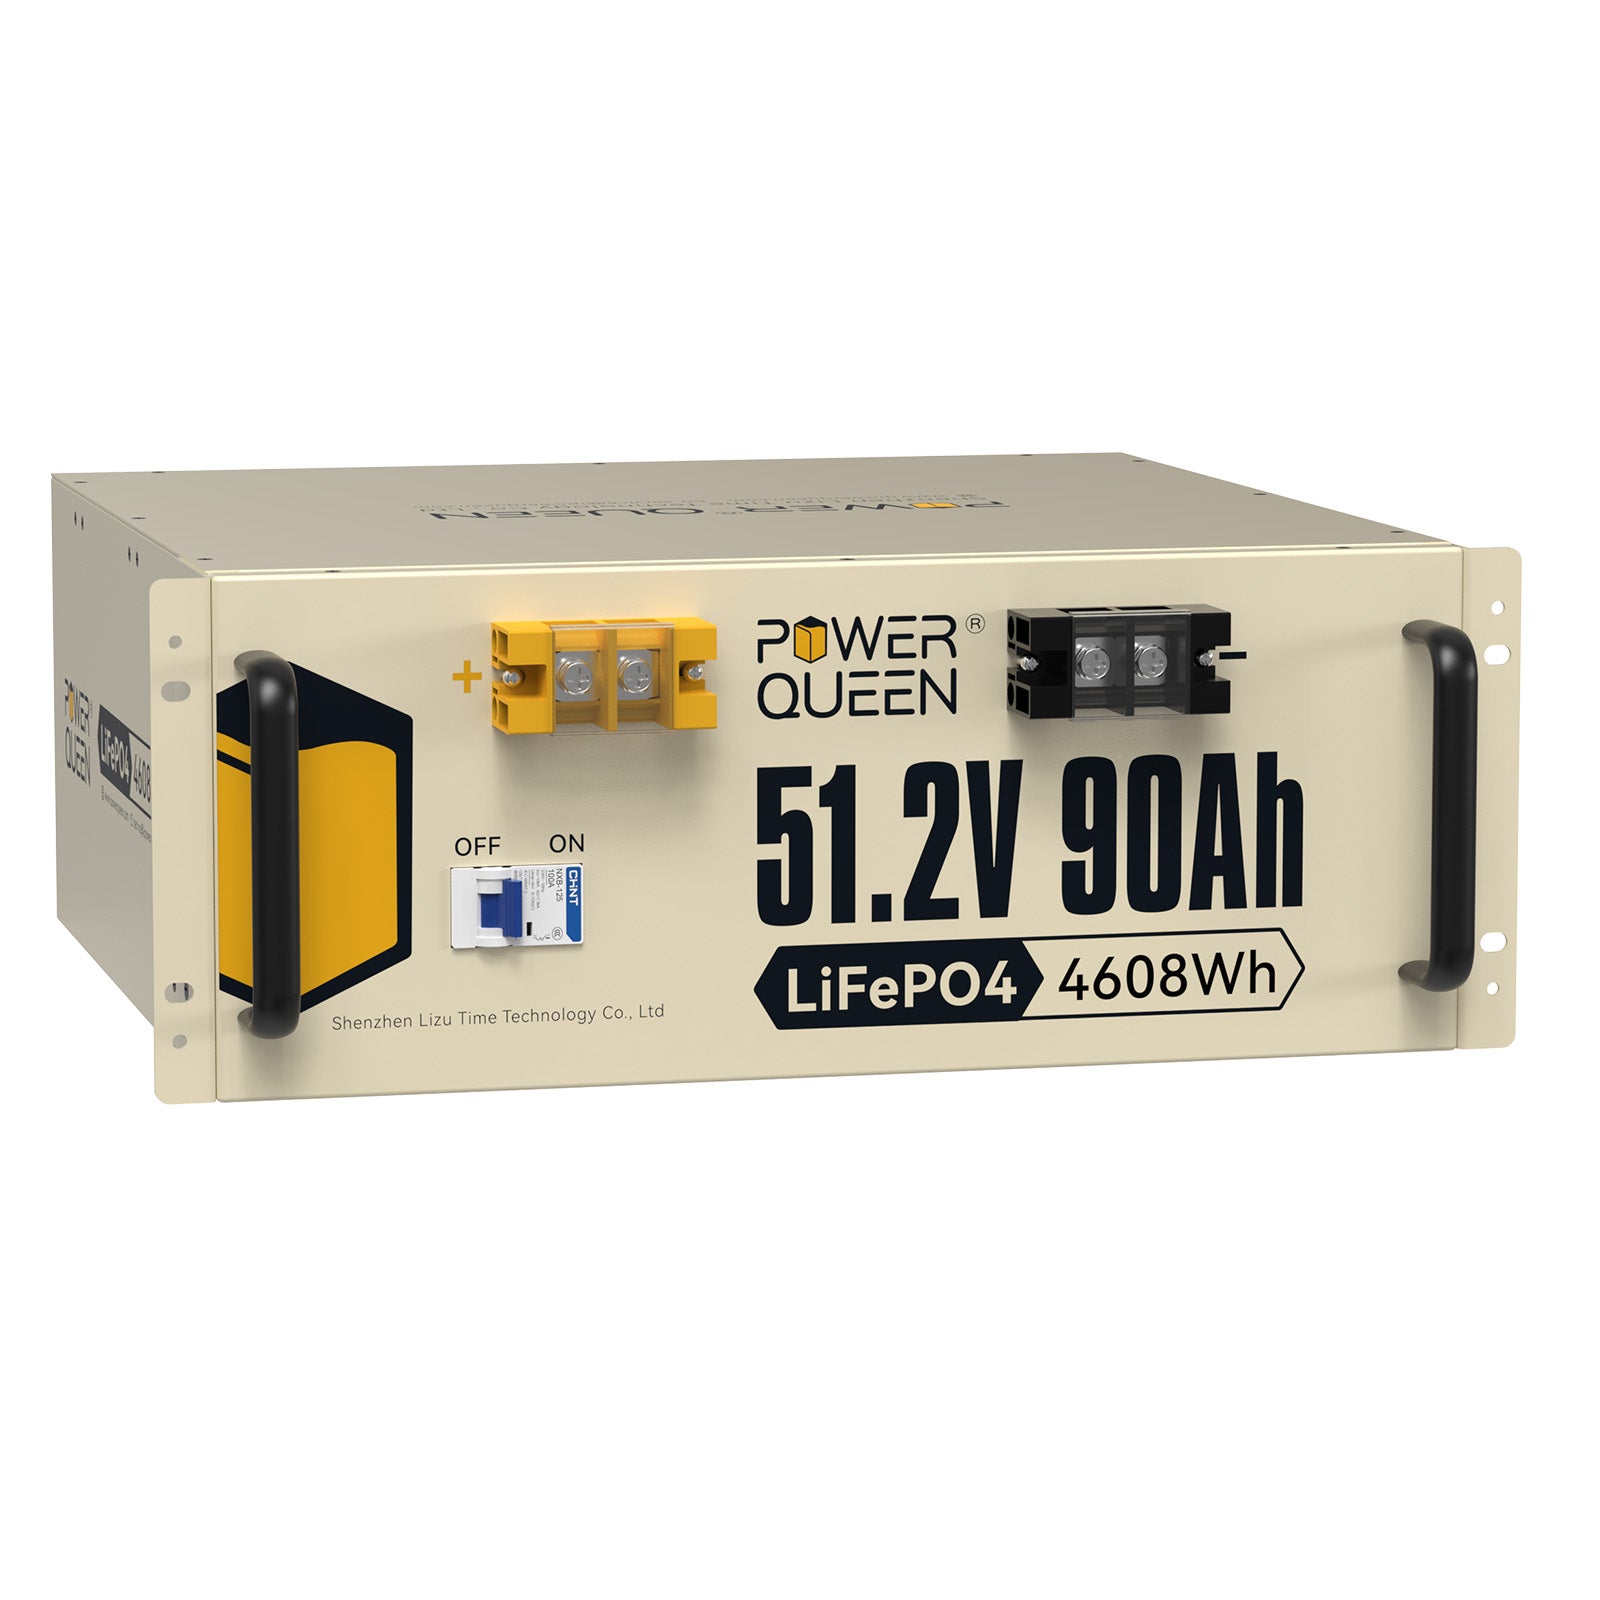 Power Queen 51.2V 90Ah LiFePO4 battery, Built-in 90A BMS